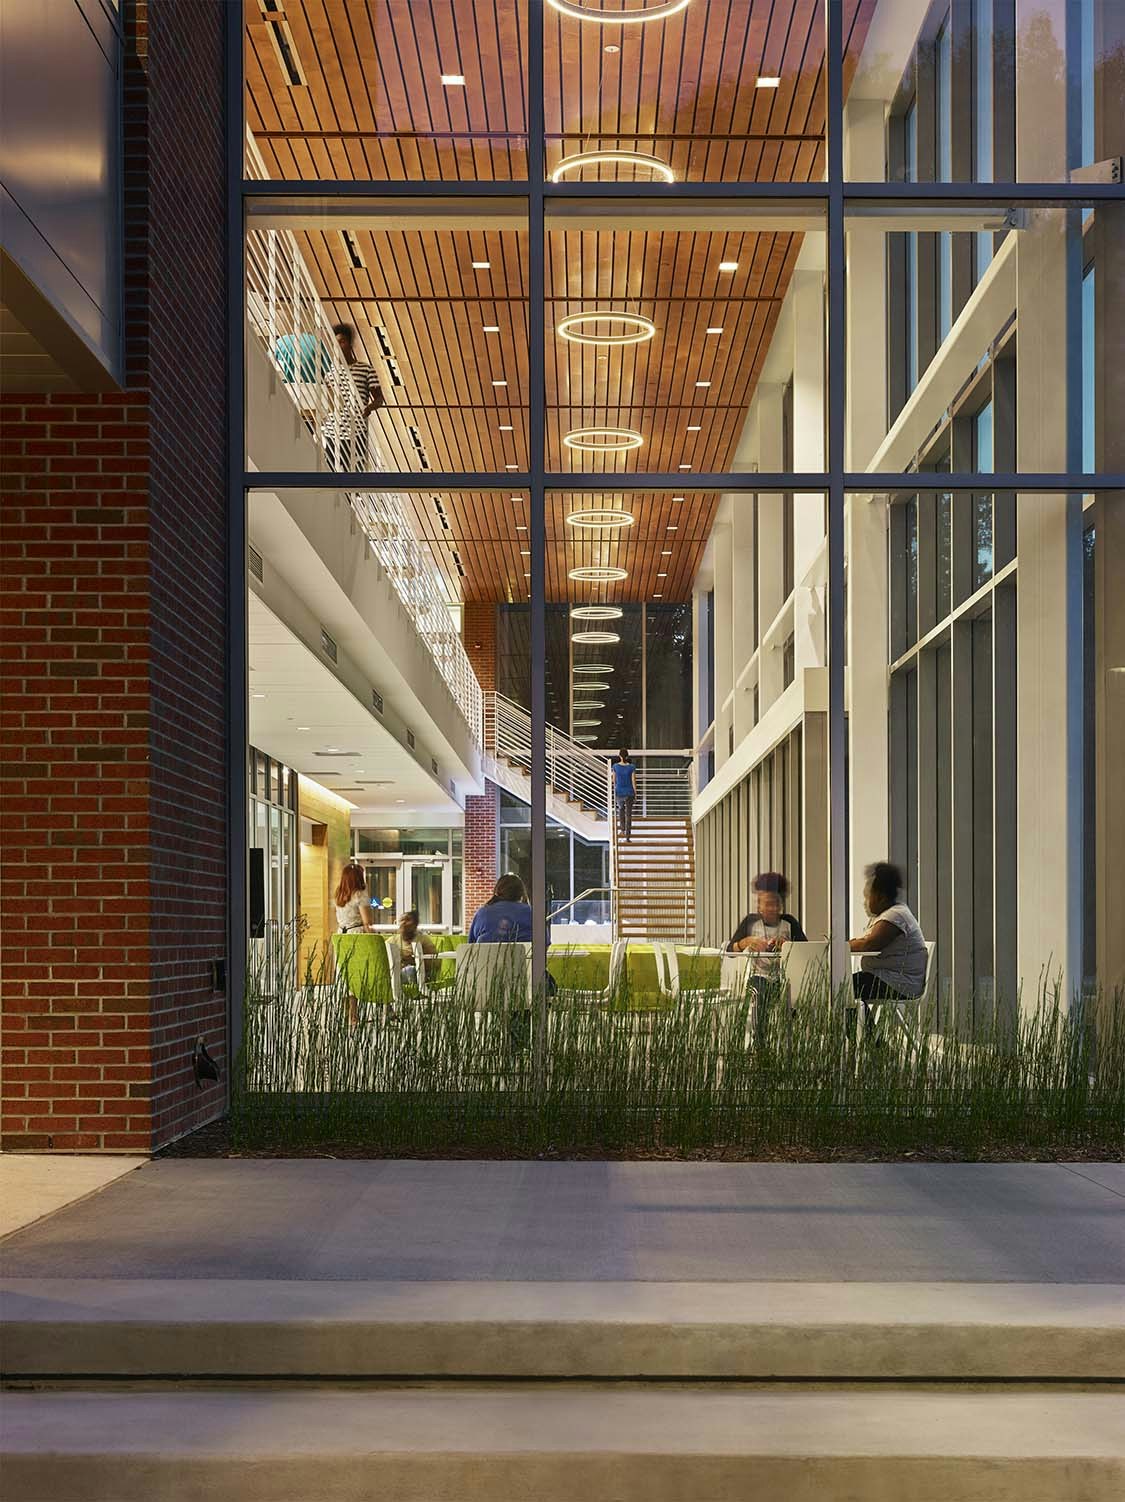 The Greer Environmental Sciences Center will embody “science on display” with fully glazed walls on the north side of classroom laboratories, exposing science and scientific exploration. 